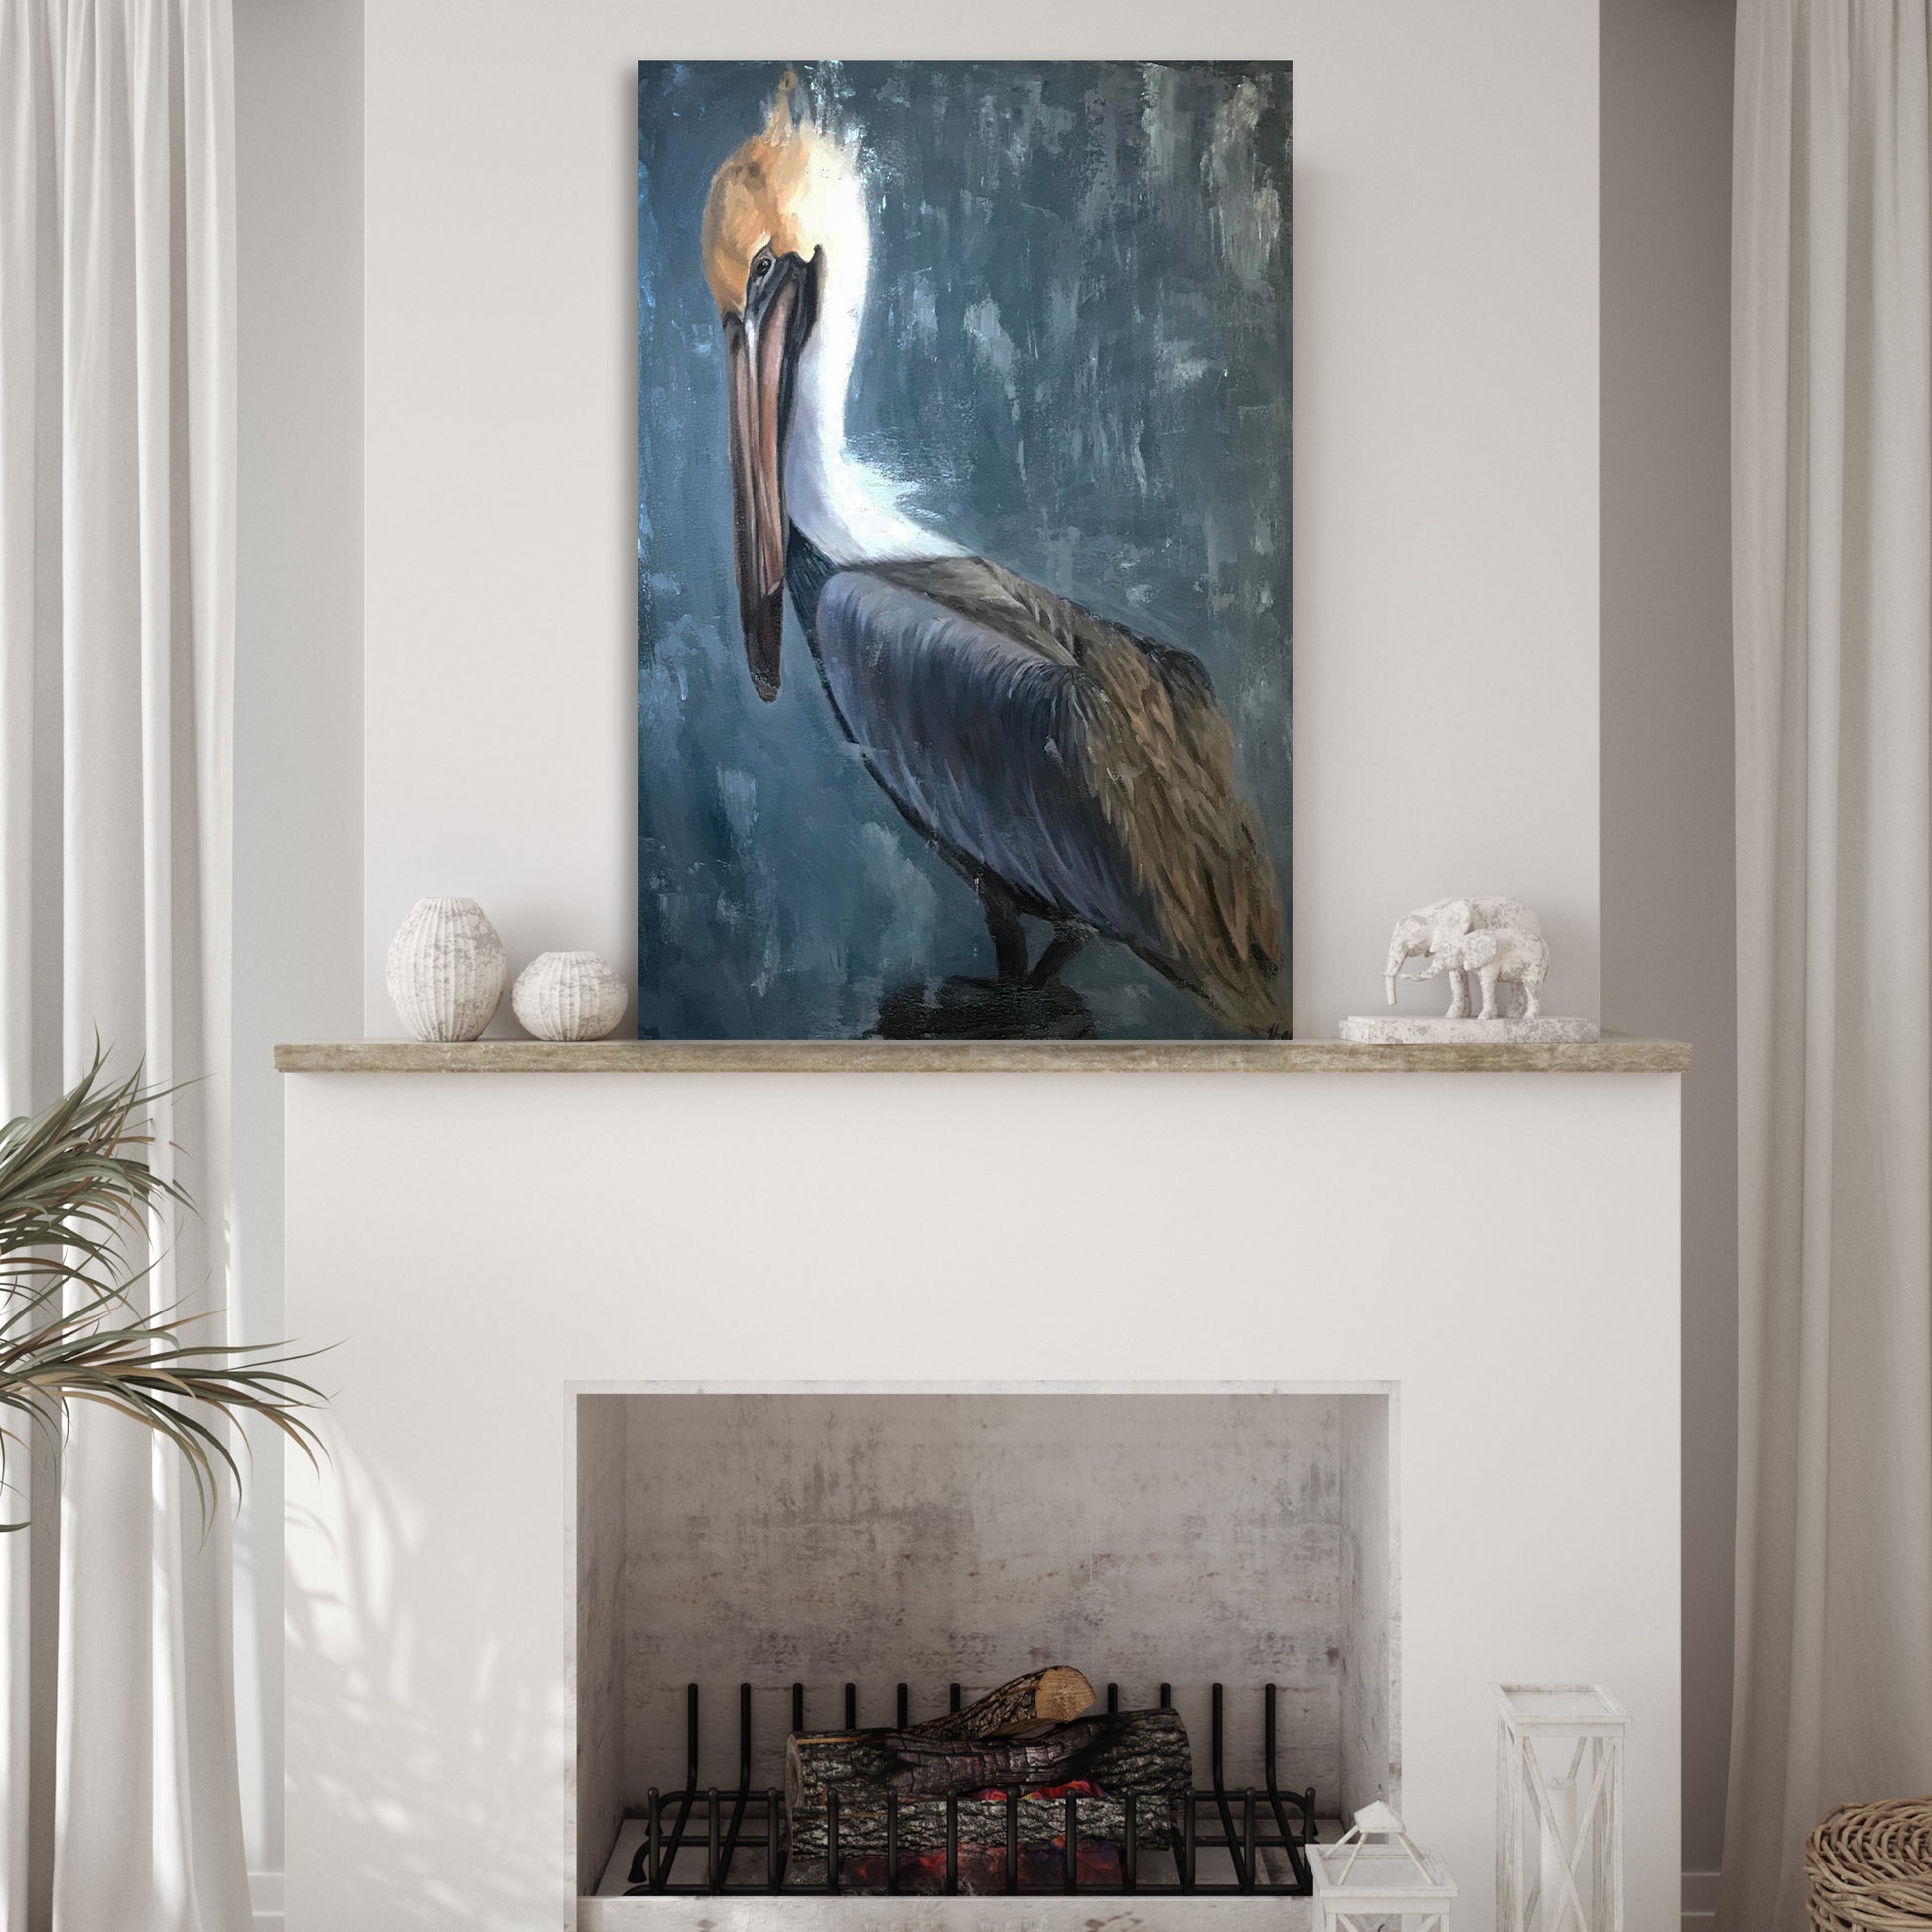 Pelican Painting "The Fish Catcher" Wall Art - Image by Tailored Canvases